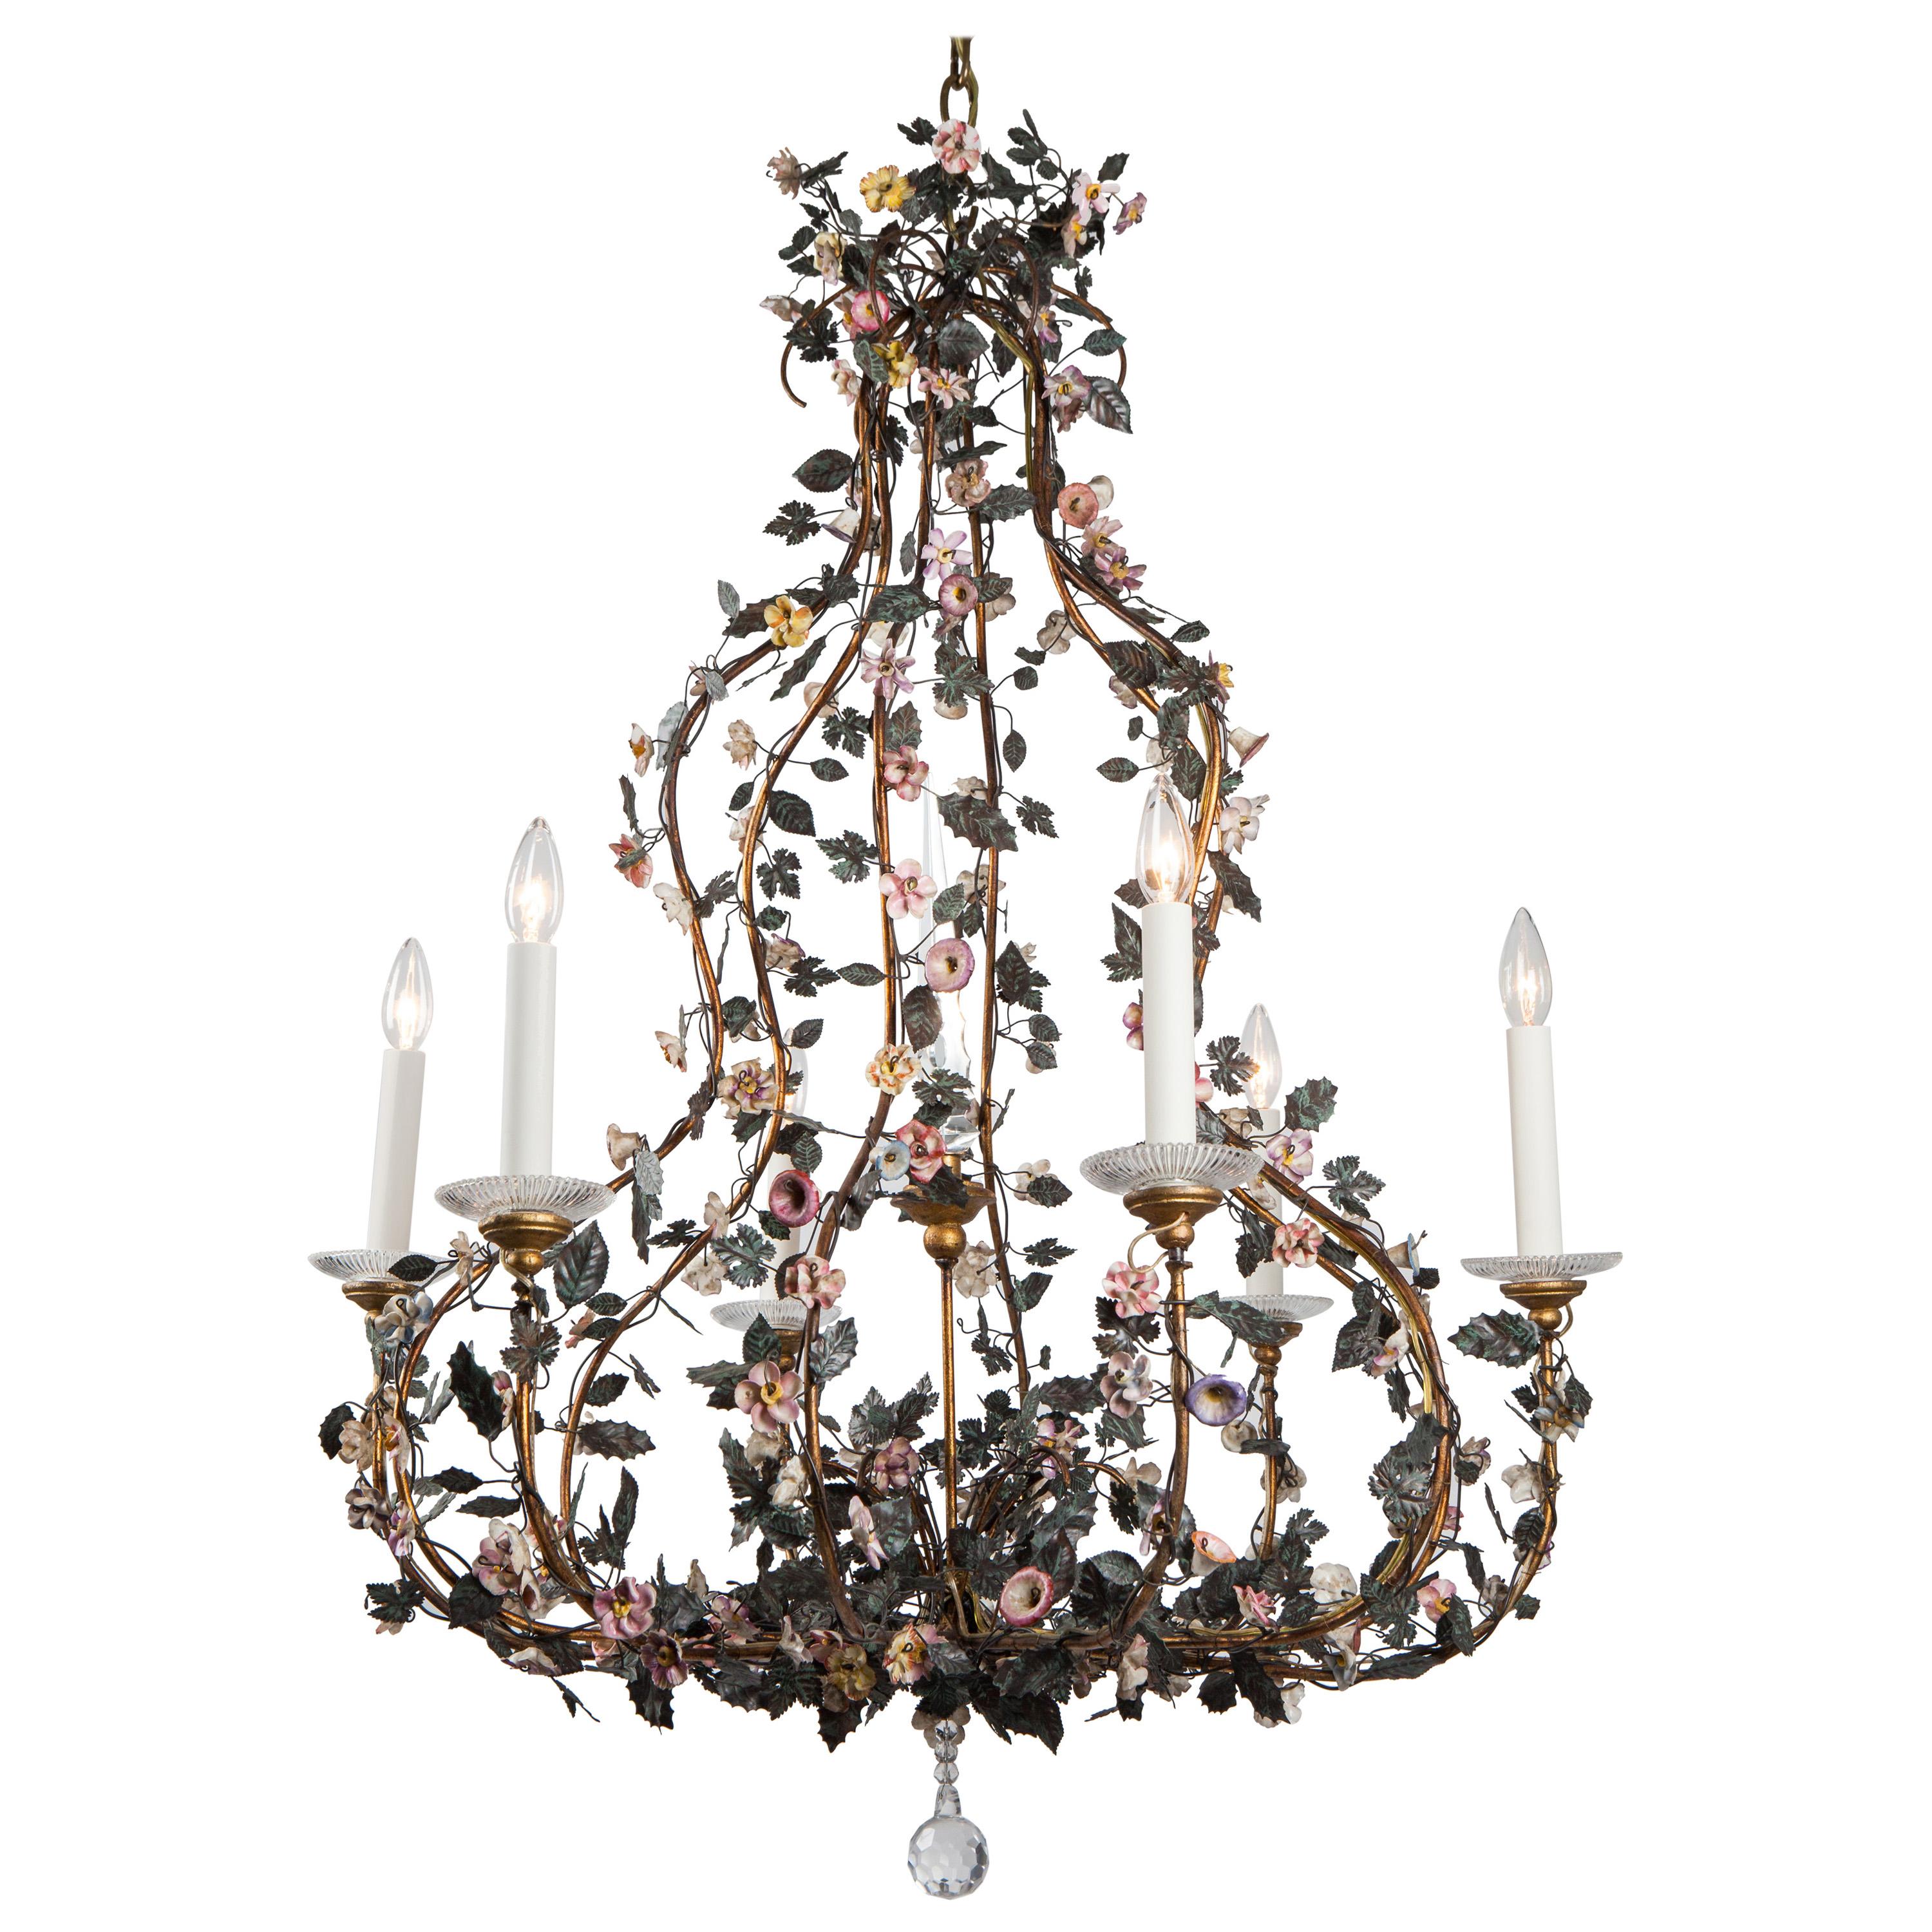 Six Arm Vintage Tole Chandelier with Hand Painted Leaves and Porcelain Flowers